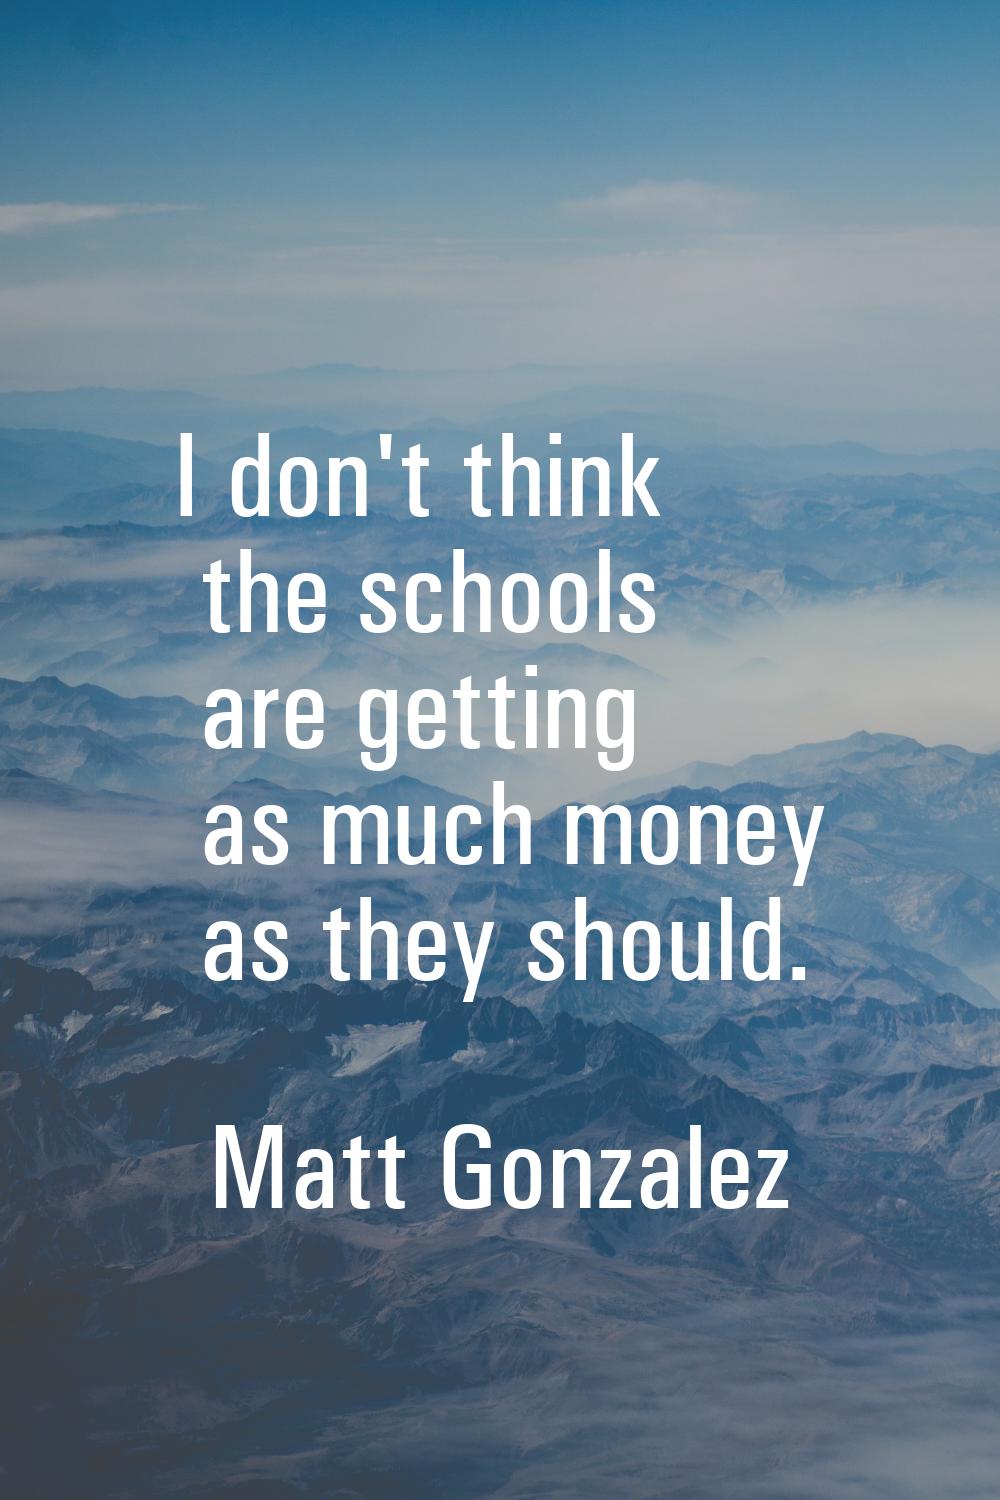 I don't think the schools are getting as much money as they should.